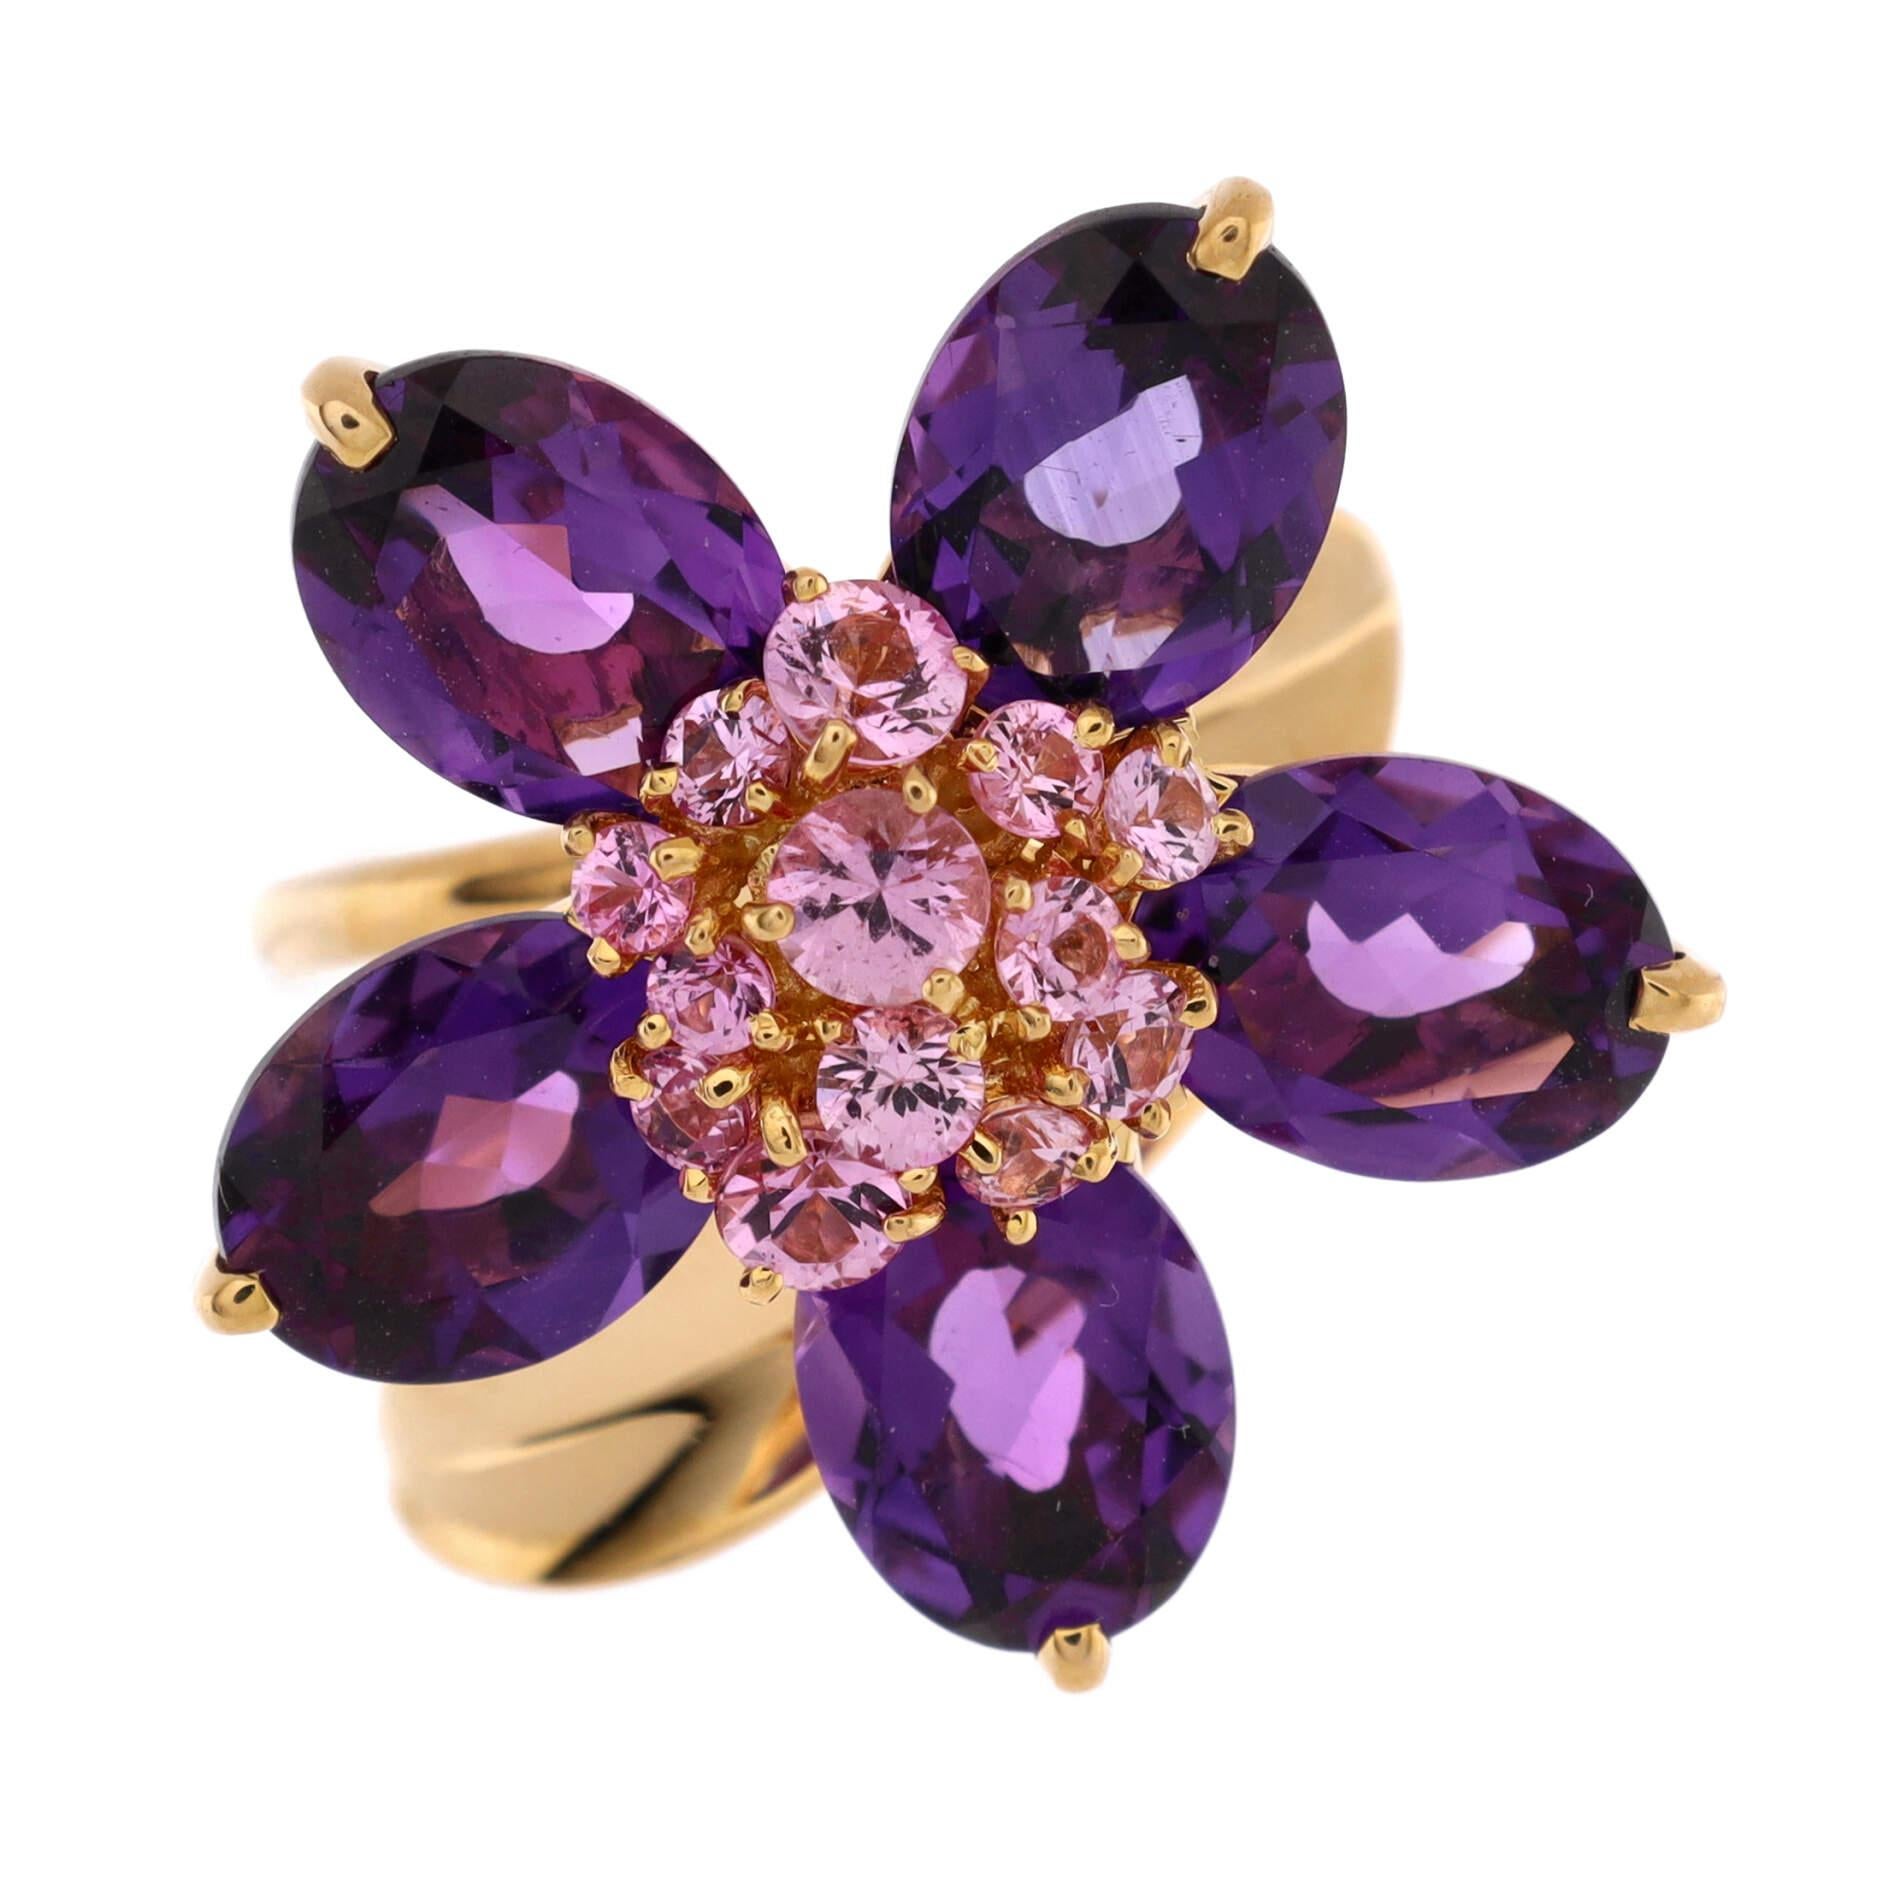 Condition: Very good. Minor wear throughout with obscured hallmarks from re-polishing.
Accessories: No Accessories
Measurements: Size: 5.25 - 50, Width: 2.00 mm
Designer: Van Cleef & Arpels
Model: Hawaii Flower Ring 18K Yellow Gold with Amethyst and